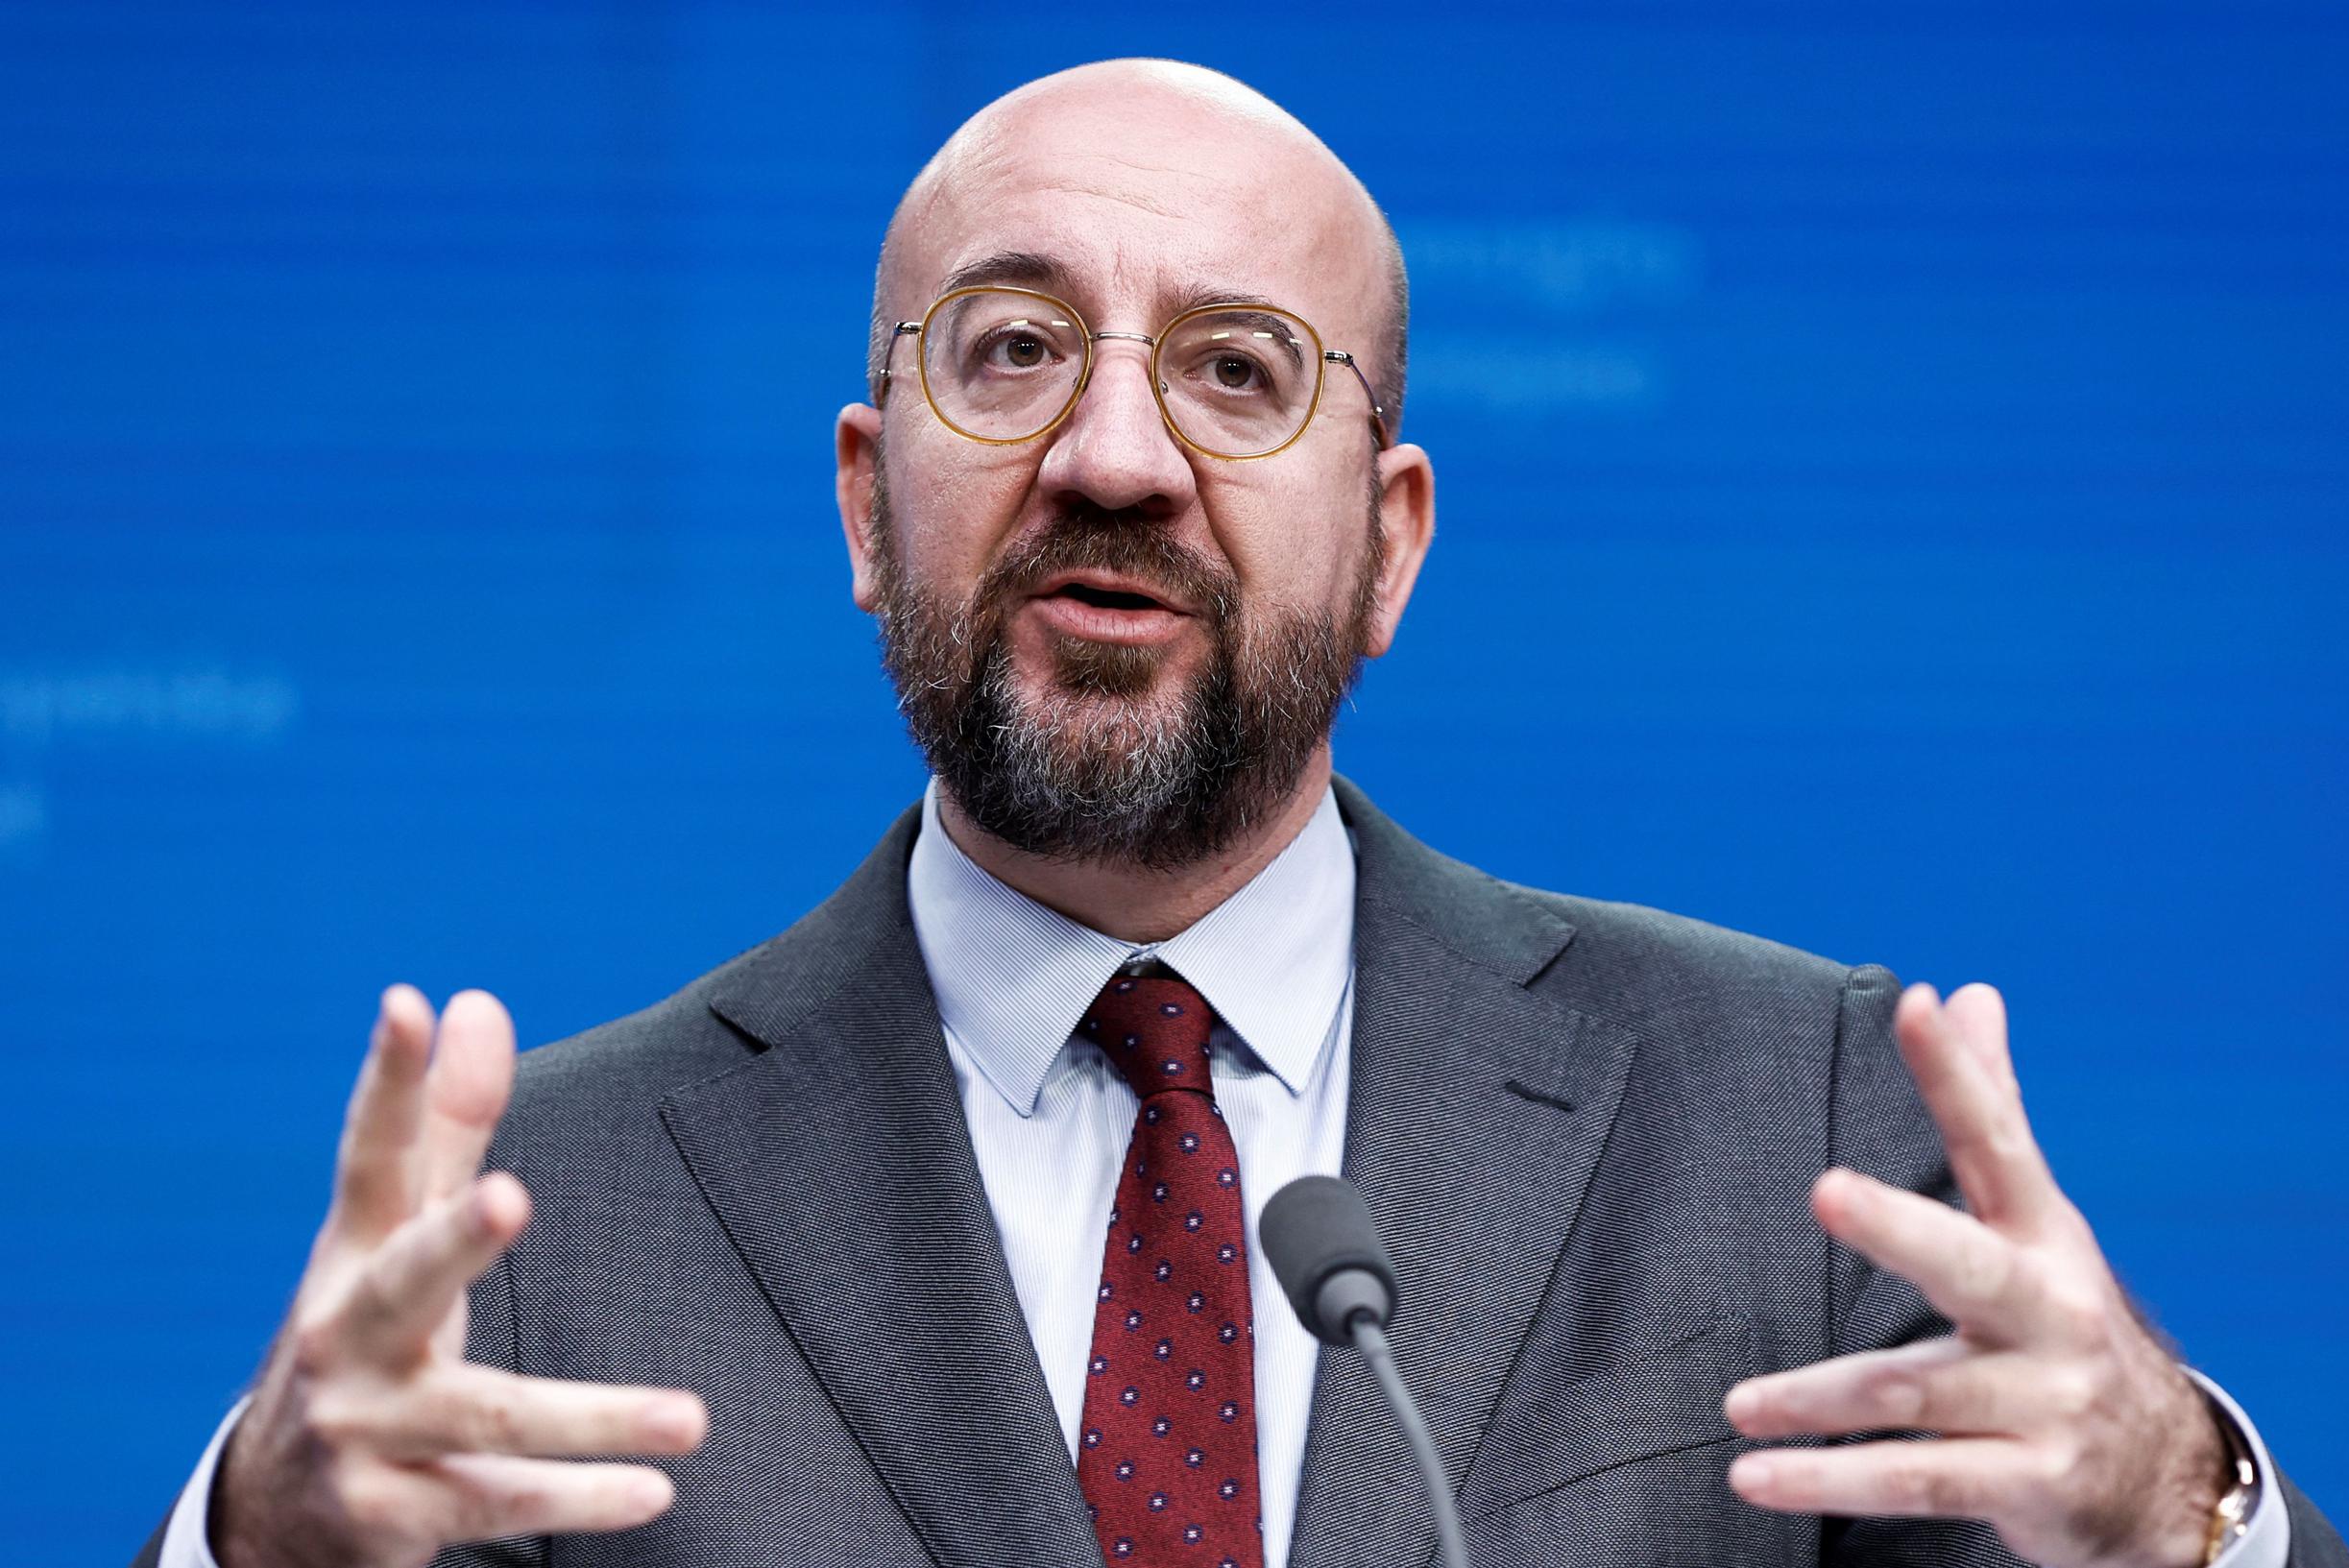 Charles Michel’s absence from European Parliament debate attributed to back problems; no questions allowed about early departure